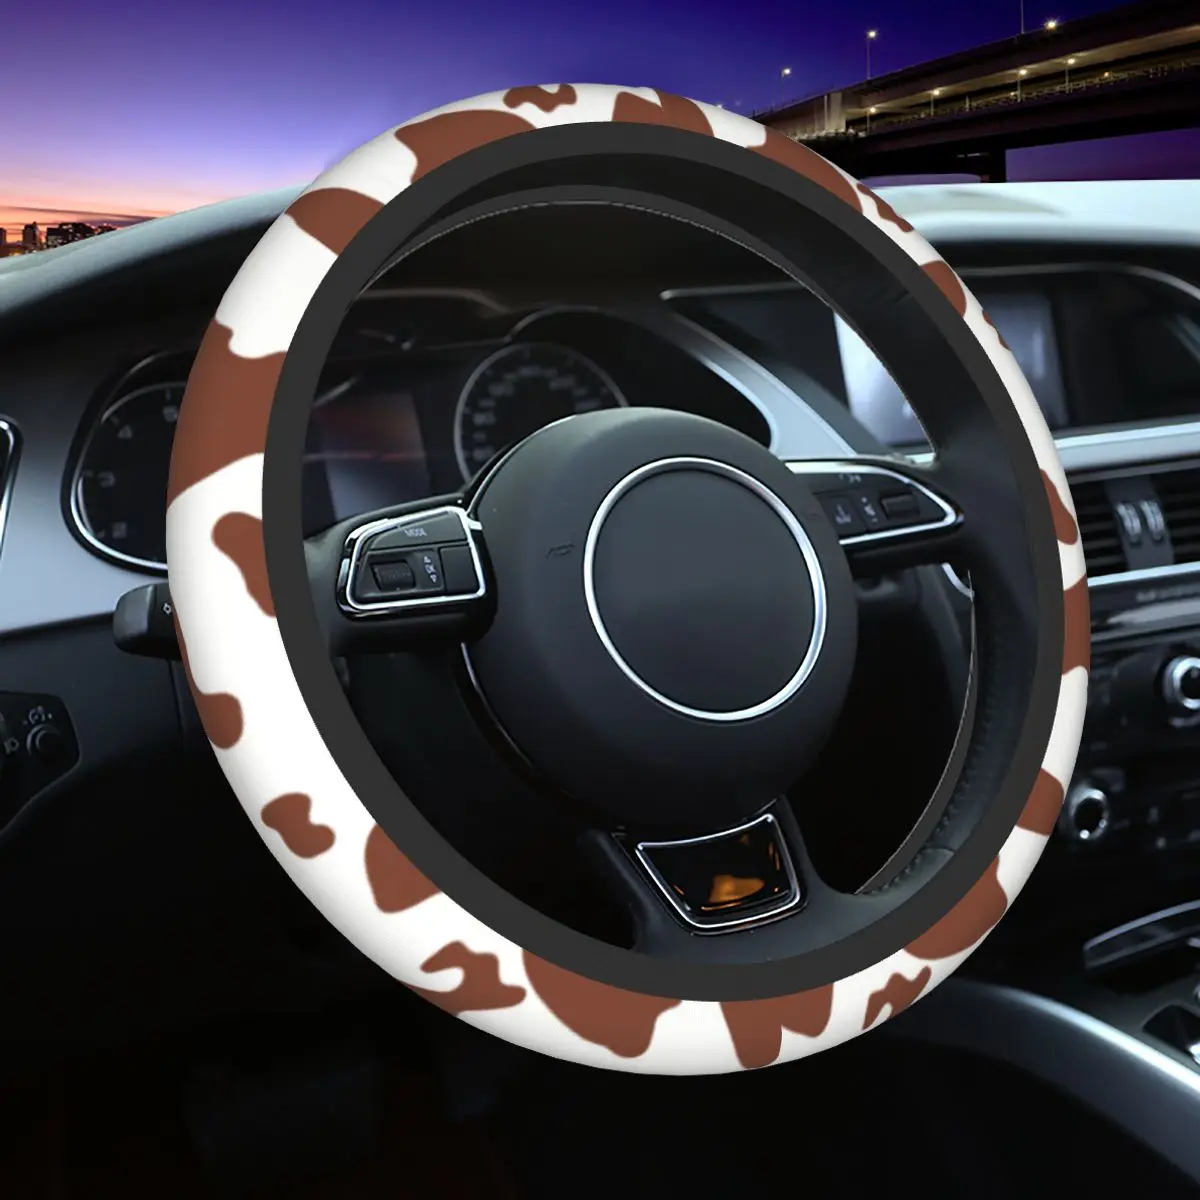 

Cow Patter Car Steering Wheel Cover 37-38 Soft Cow Print Pattern Animal Texture Elastische Car-styling Car Accessories